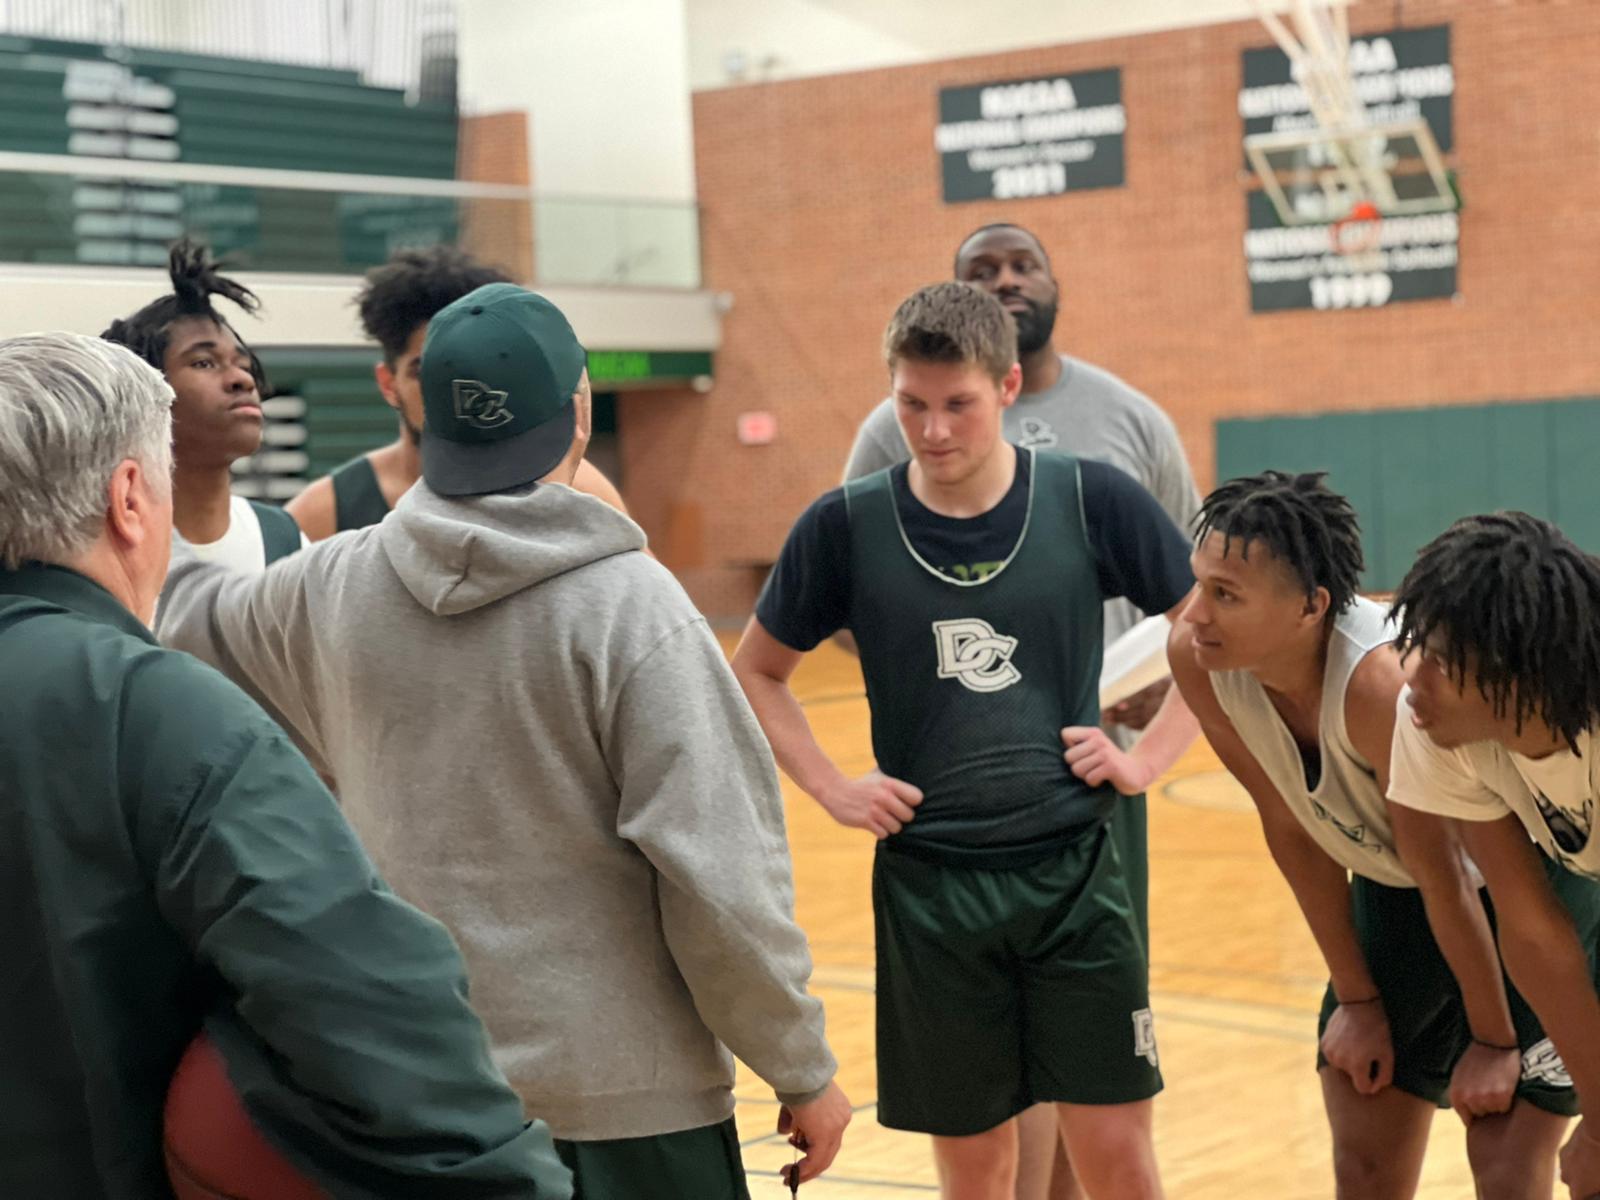 Delta’s basketball team looks to make a difference